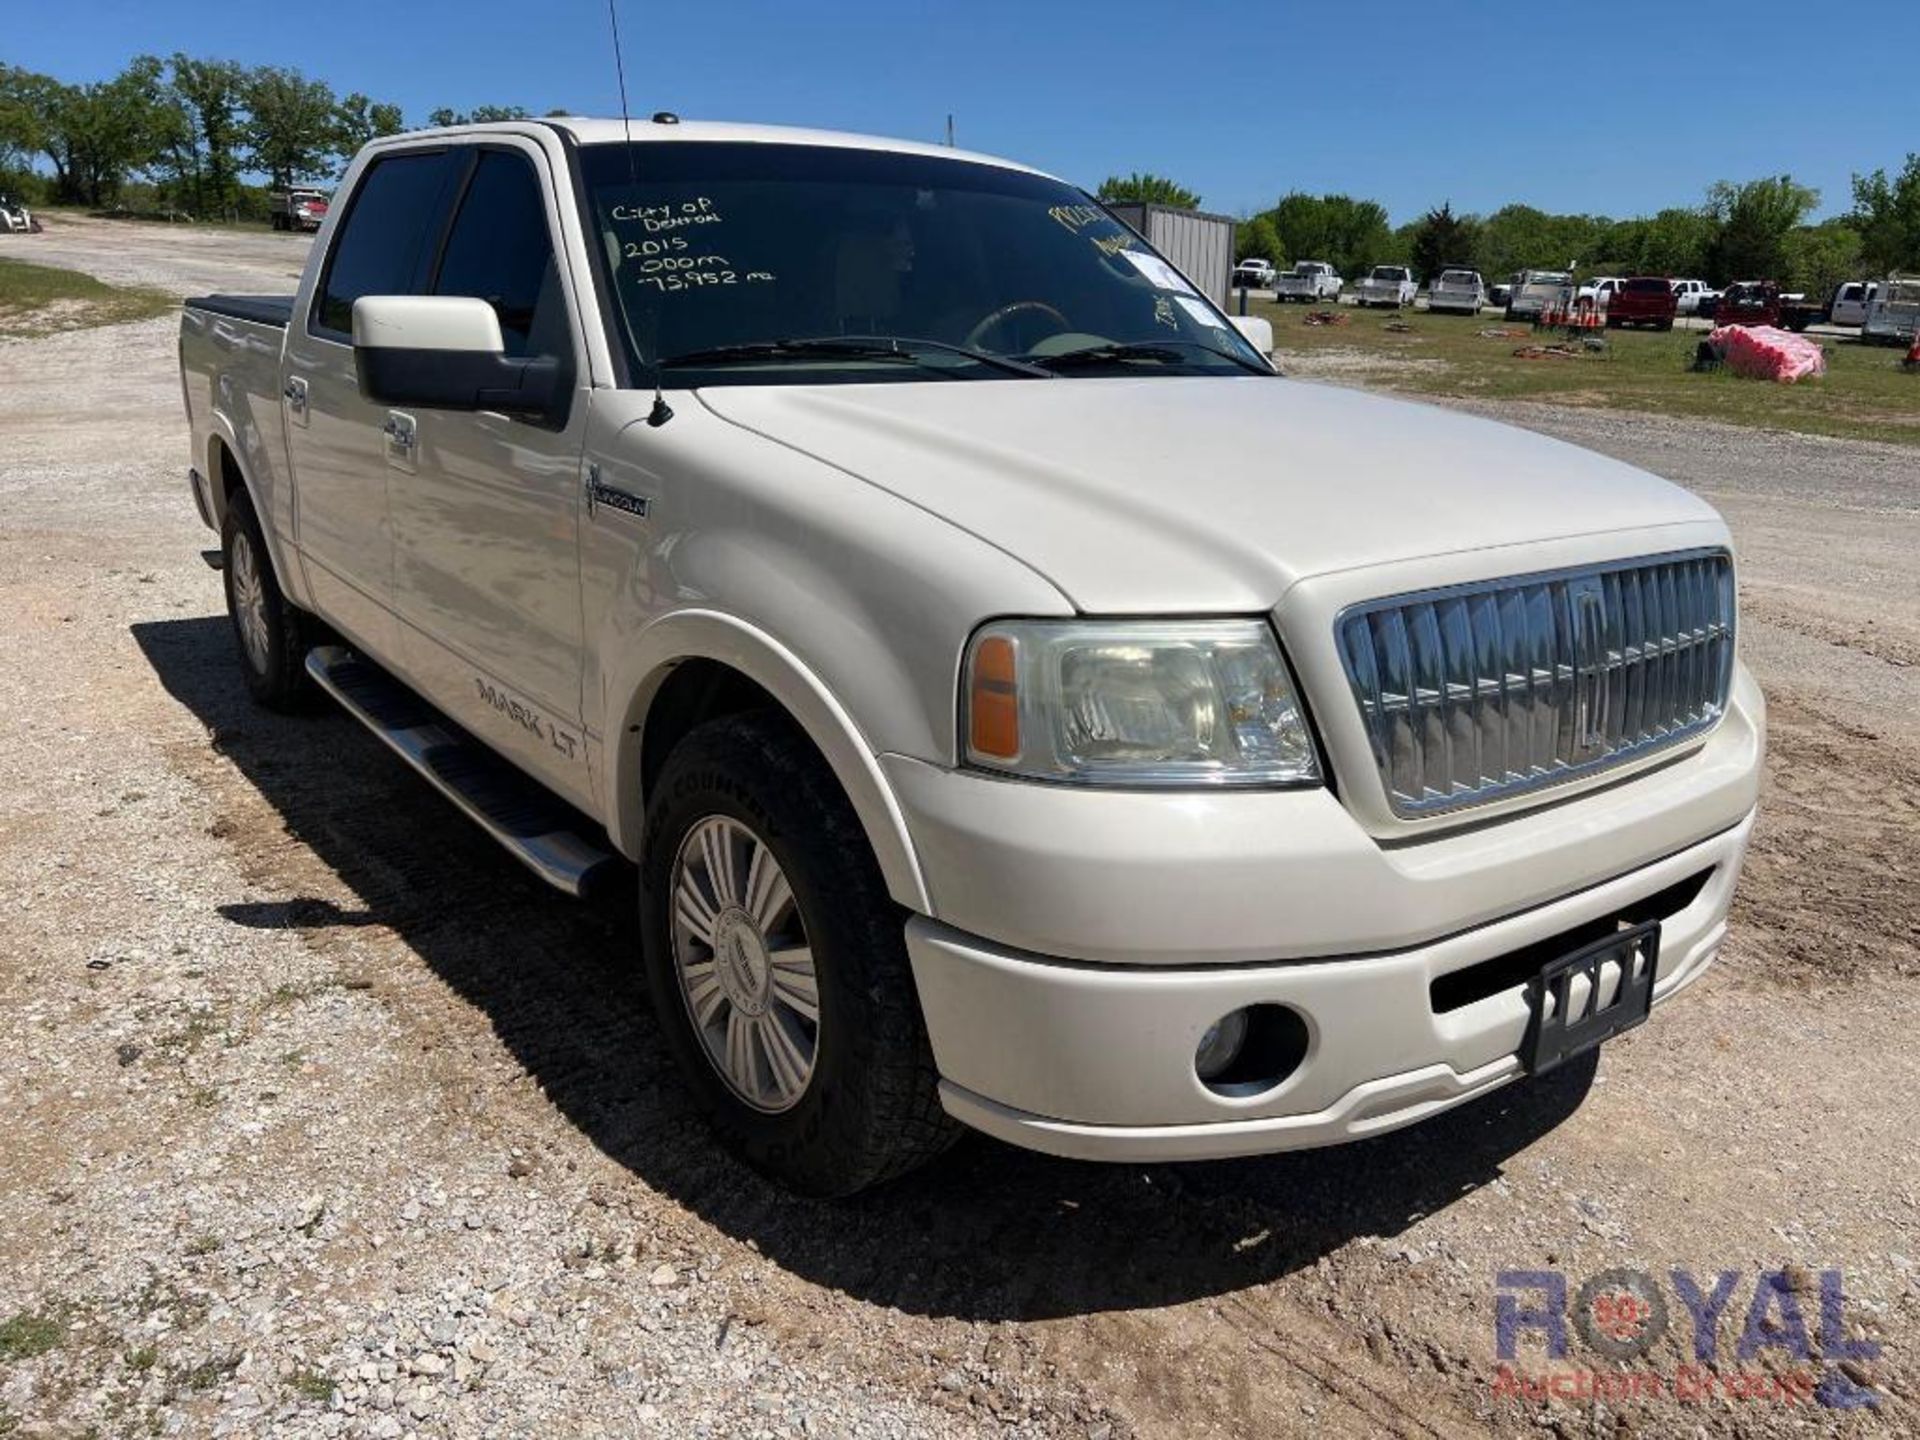 2015 Lincoln Mark LT Crew Cab Pickup Truck - Image 2 of 75